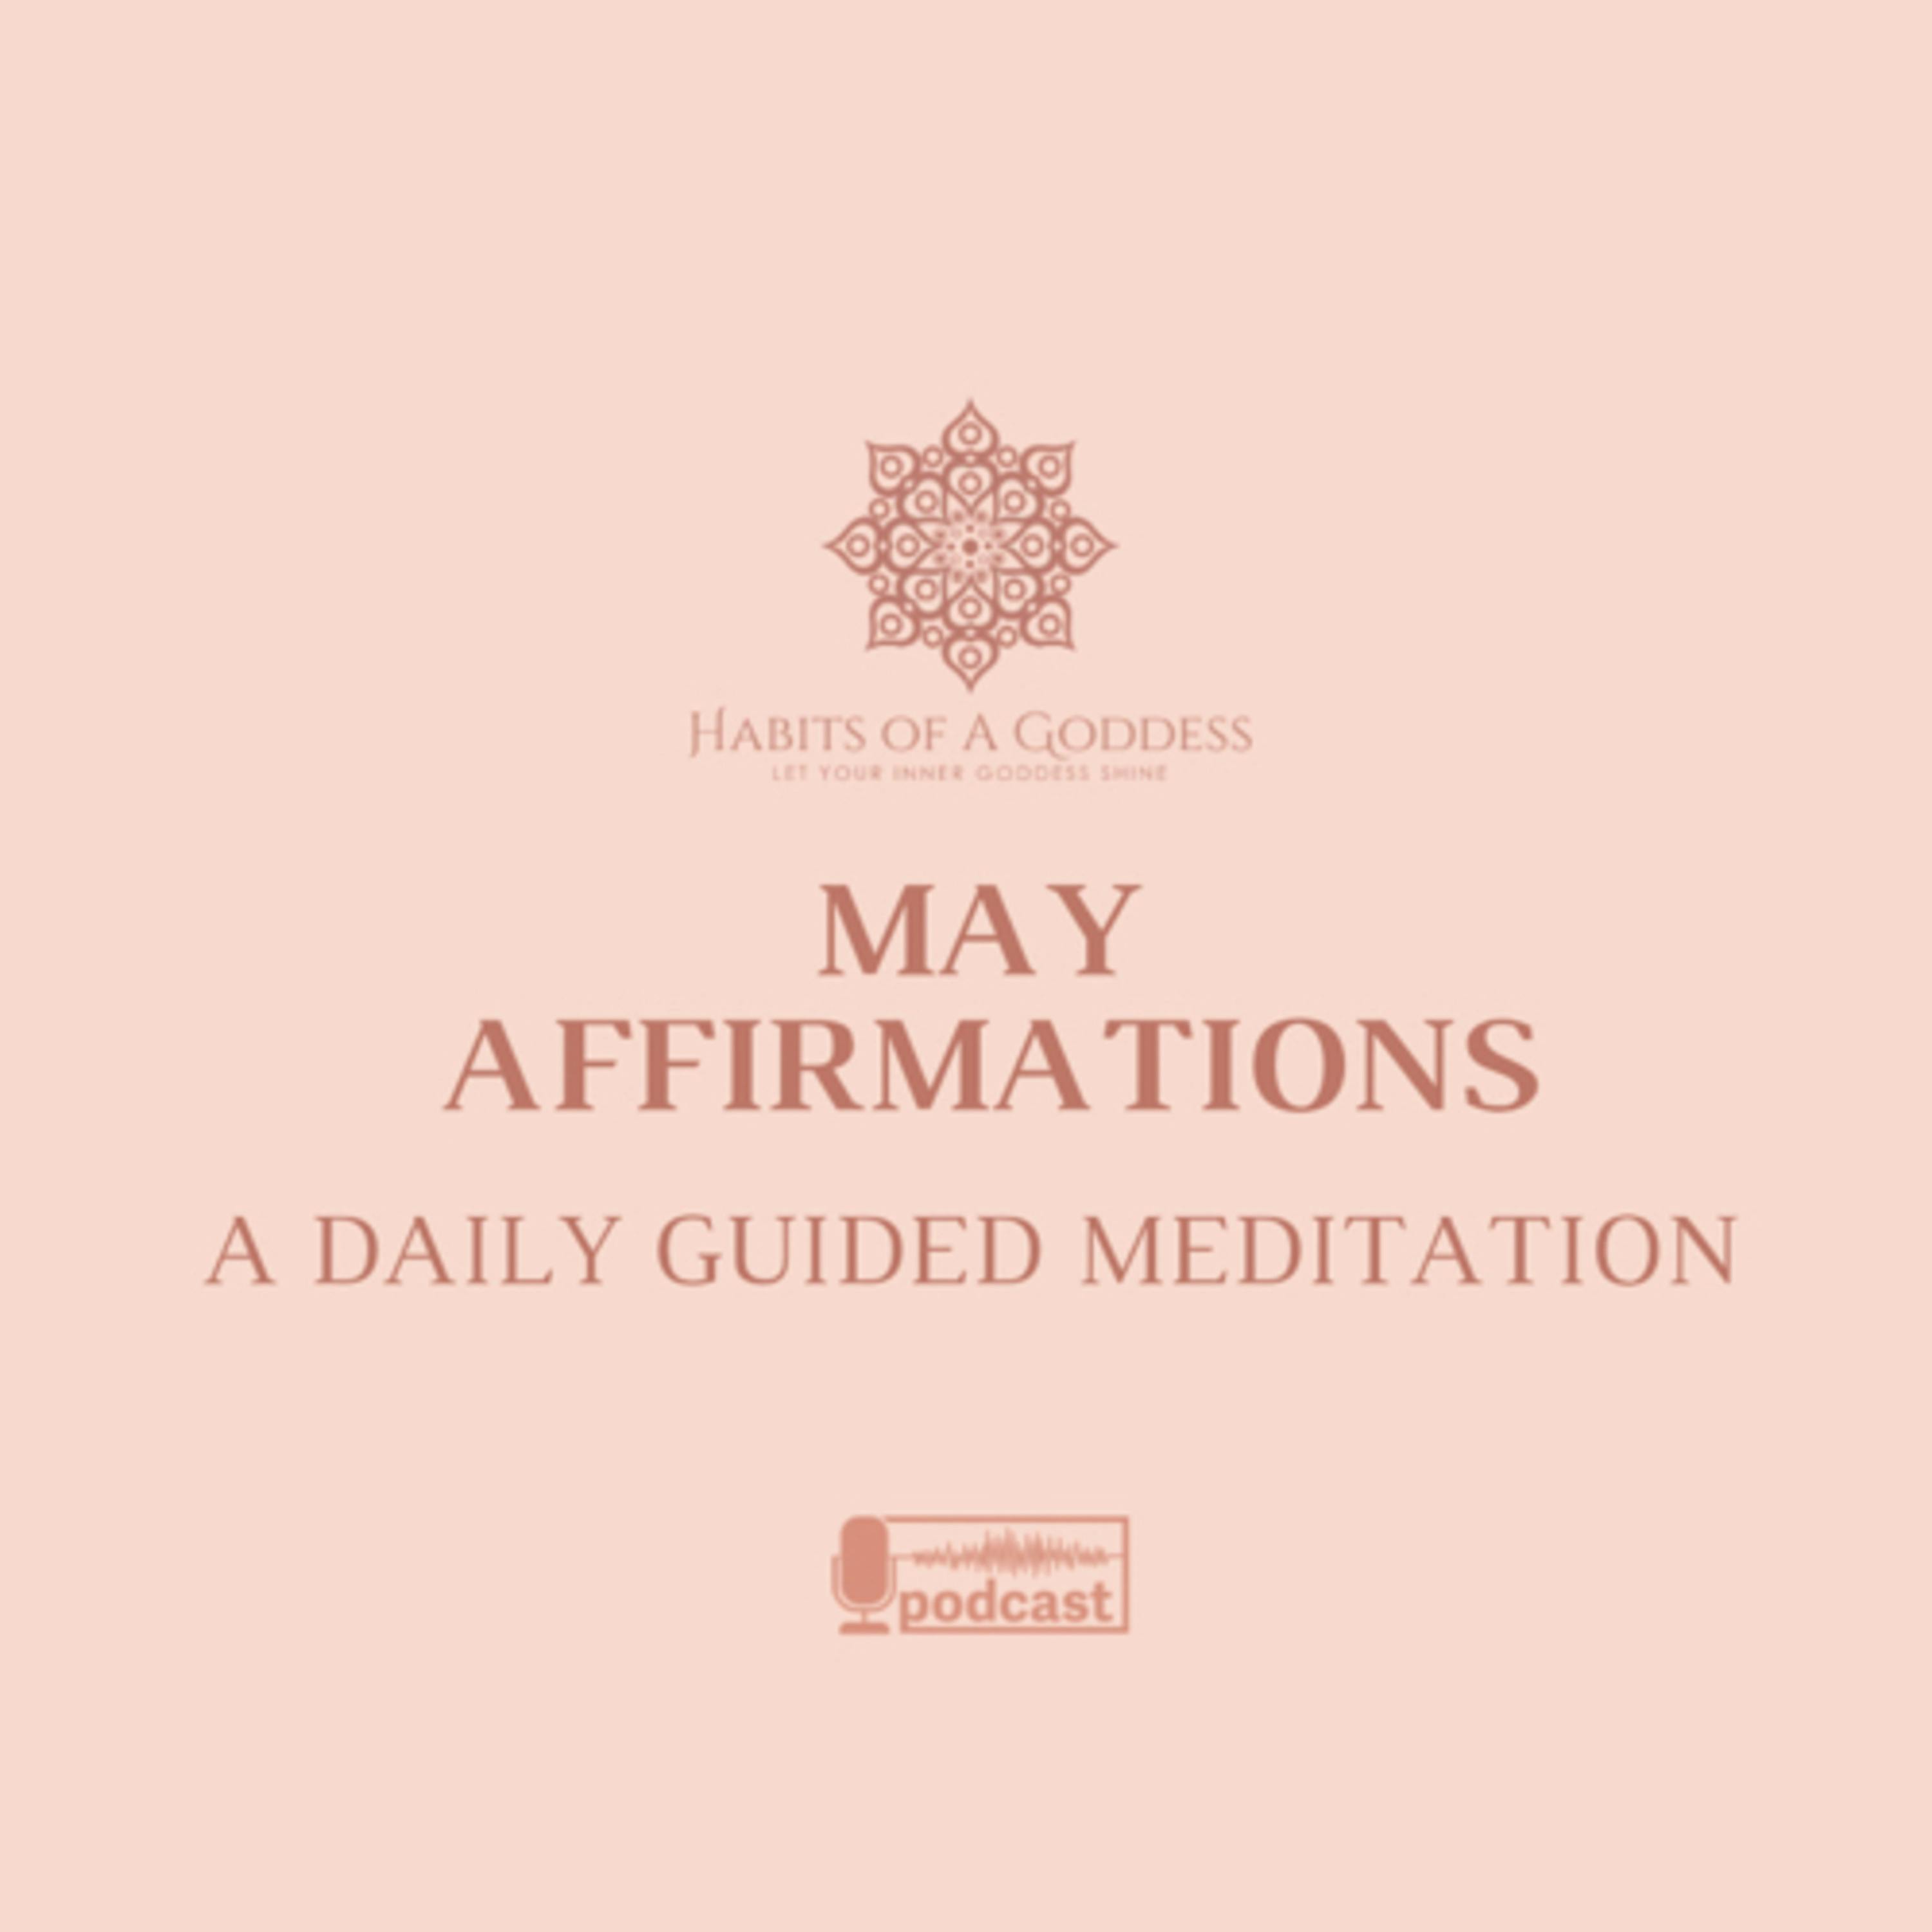 MAY AFFIRMATIONS | HABITS OF A GODDESS